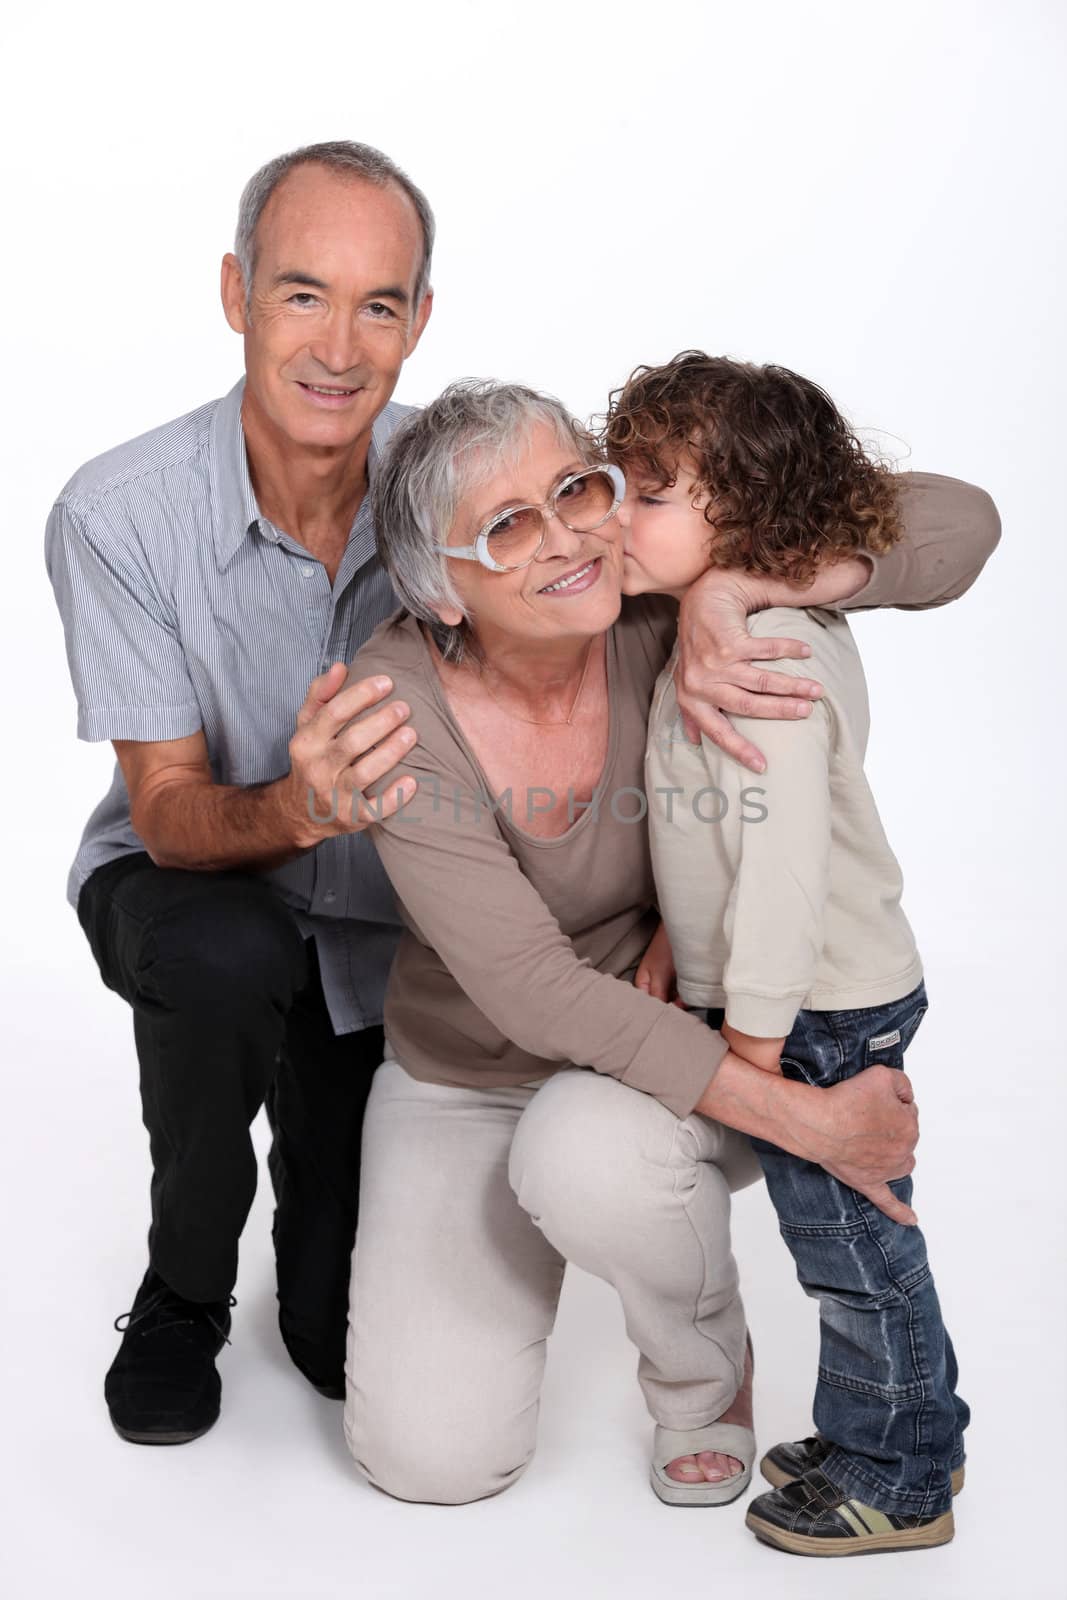 Grandparents with grandson by phovoir